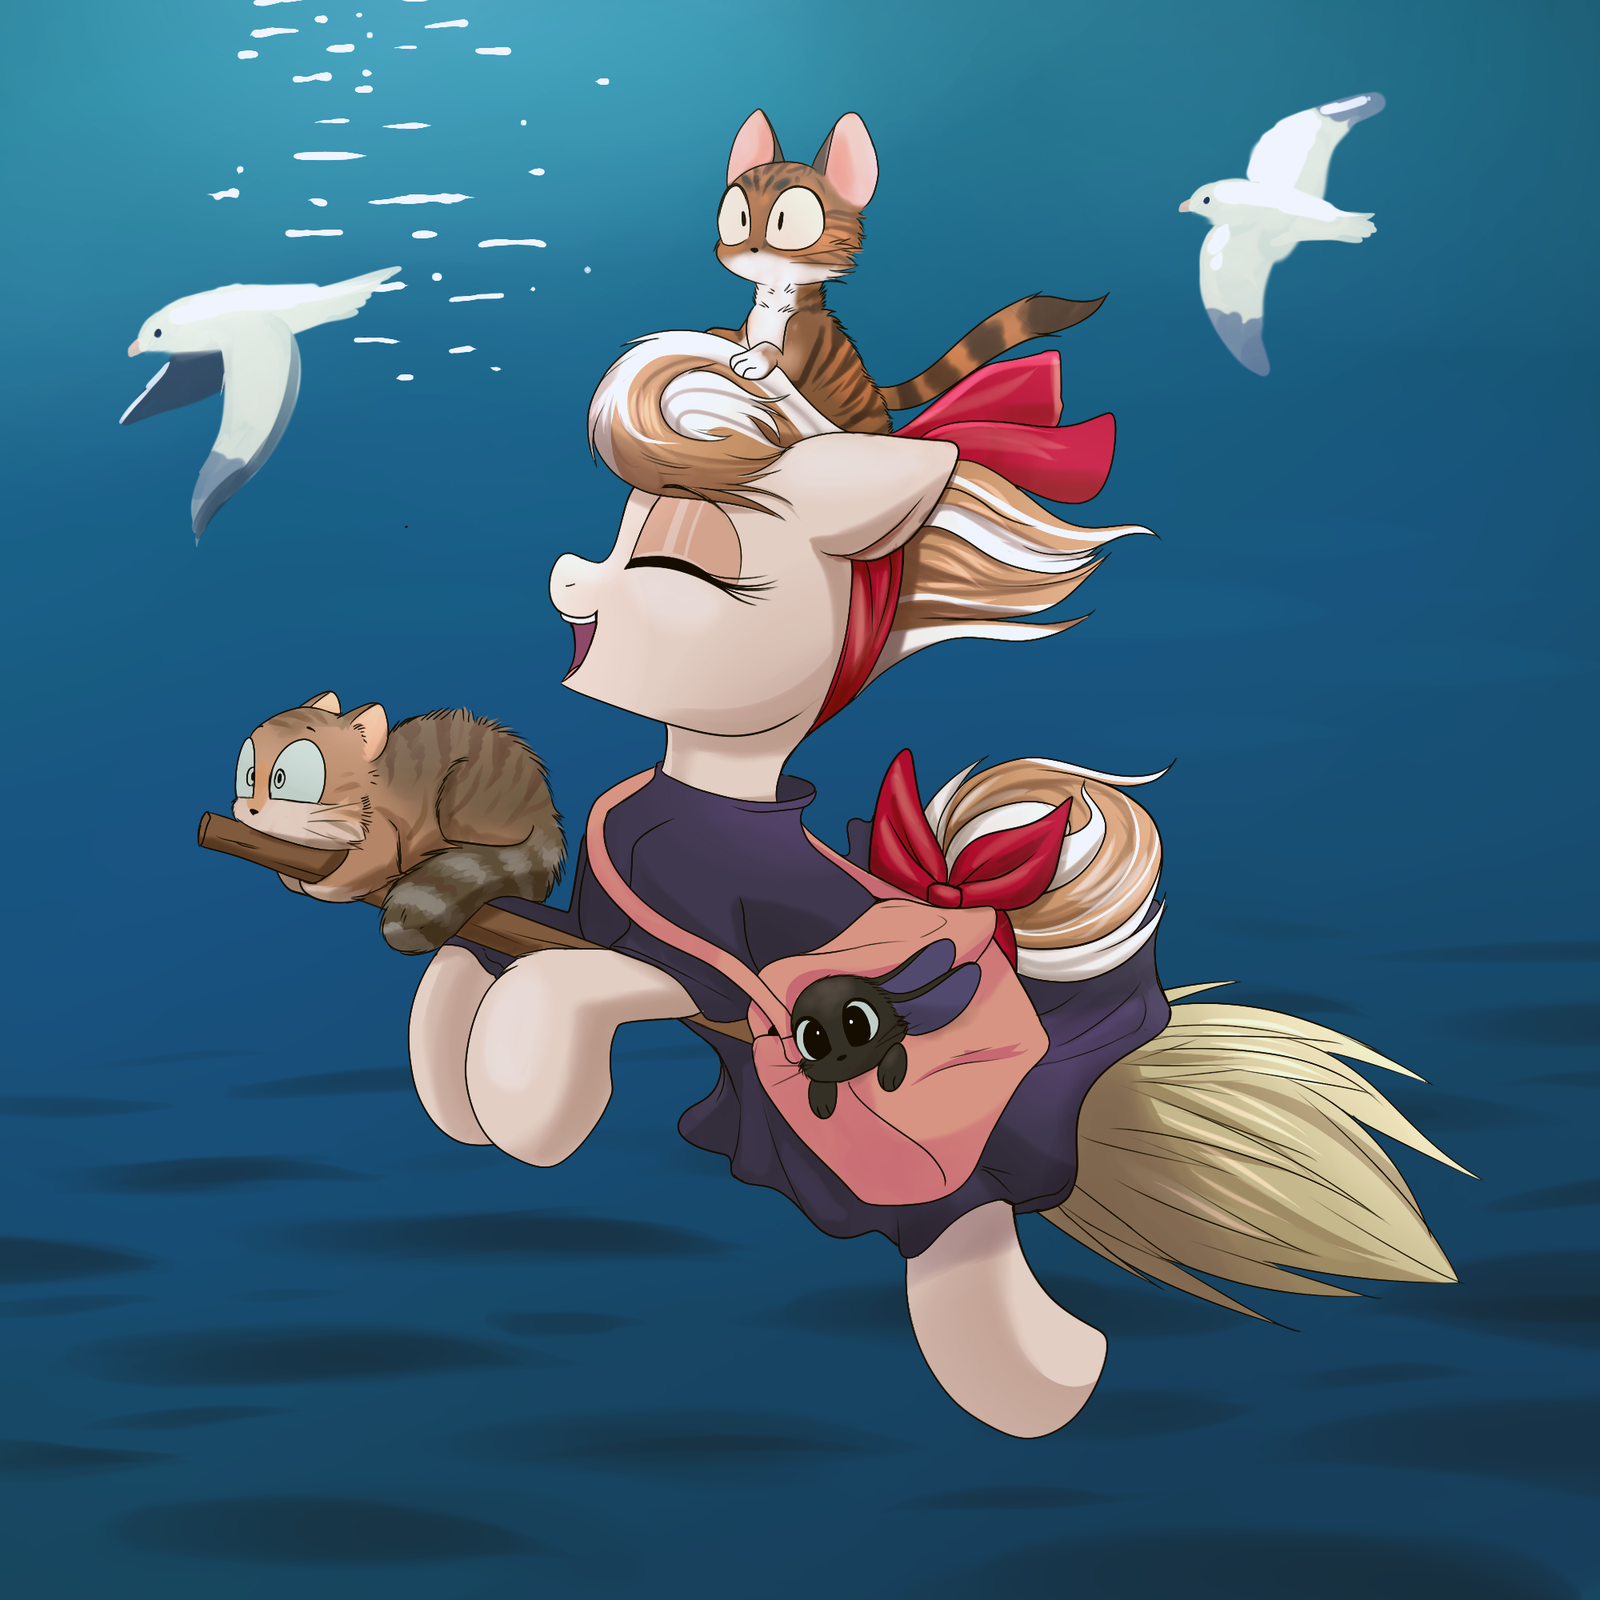 Cinnamon Spangled's Delivery Service - My little pony, Kiki's delivery service, , Crossover, Original character, Anime, Ravensunart